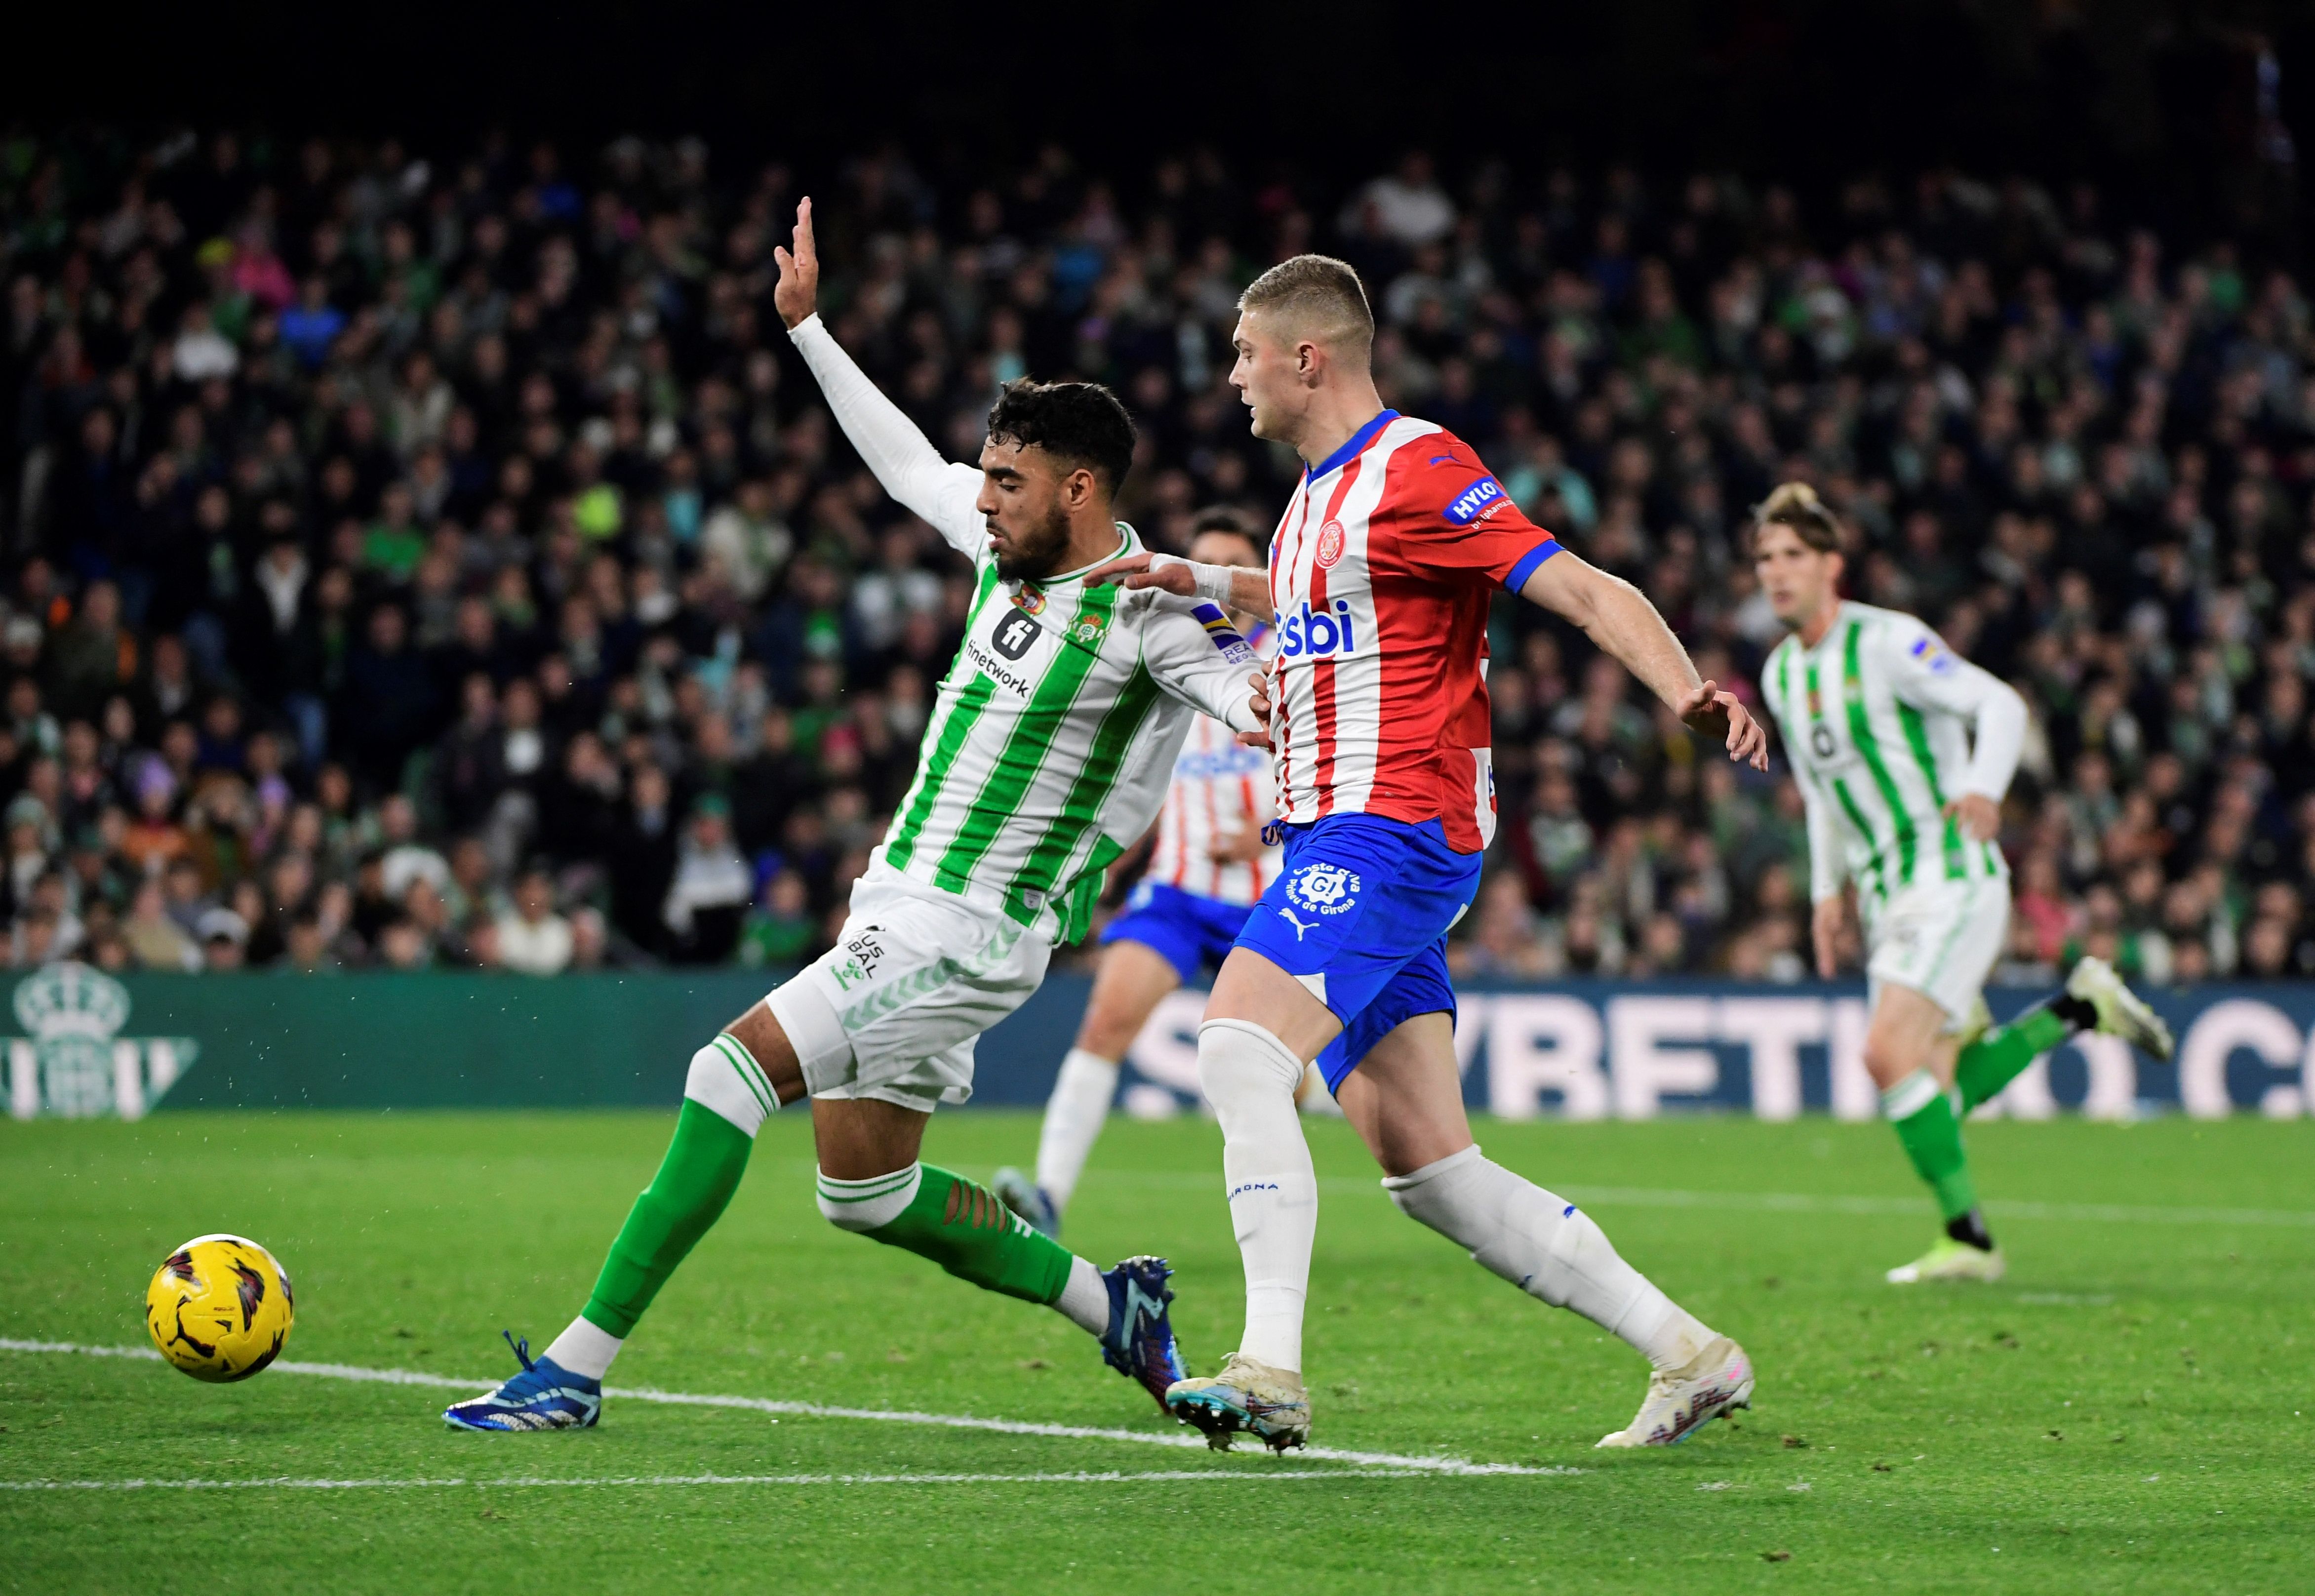 BEHIND THE SCENES, Real Betis - Deportivo Alavés